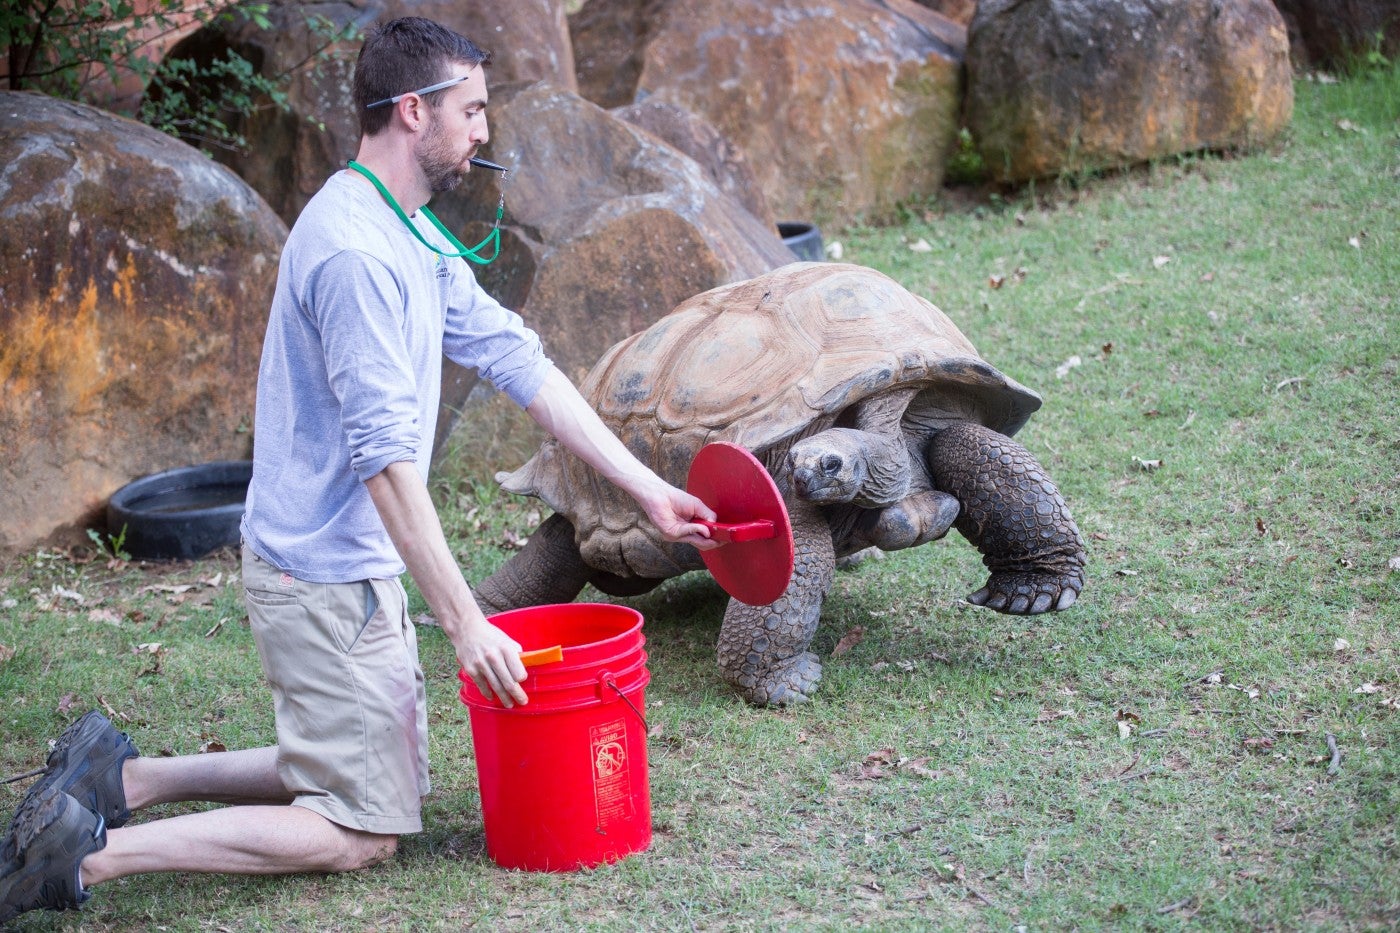 Keeper Matt Neff kneels near an Aldabra tortoise. He holds out a red disk and asks the tortoise to touch the target with its nose.